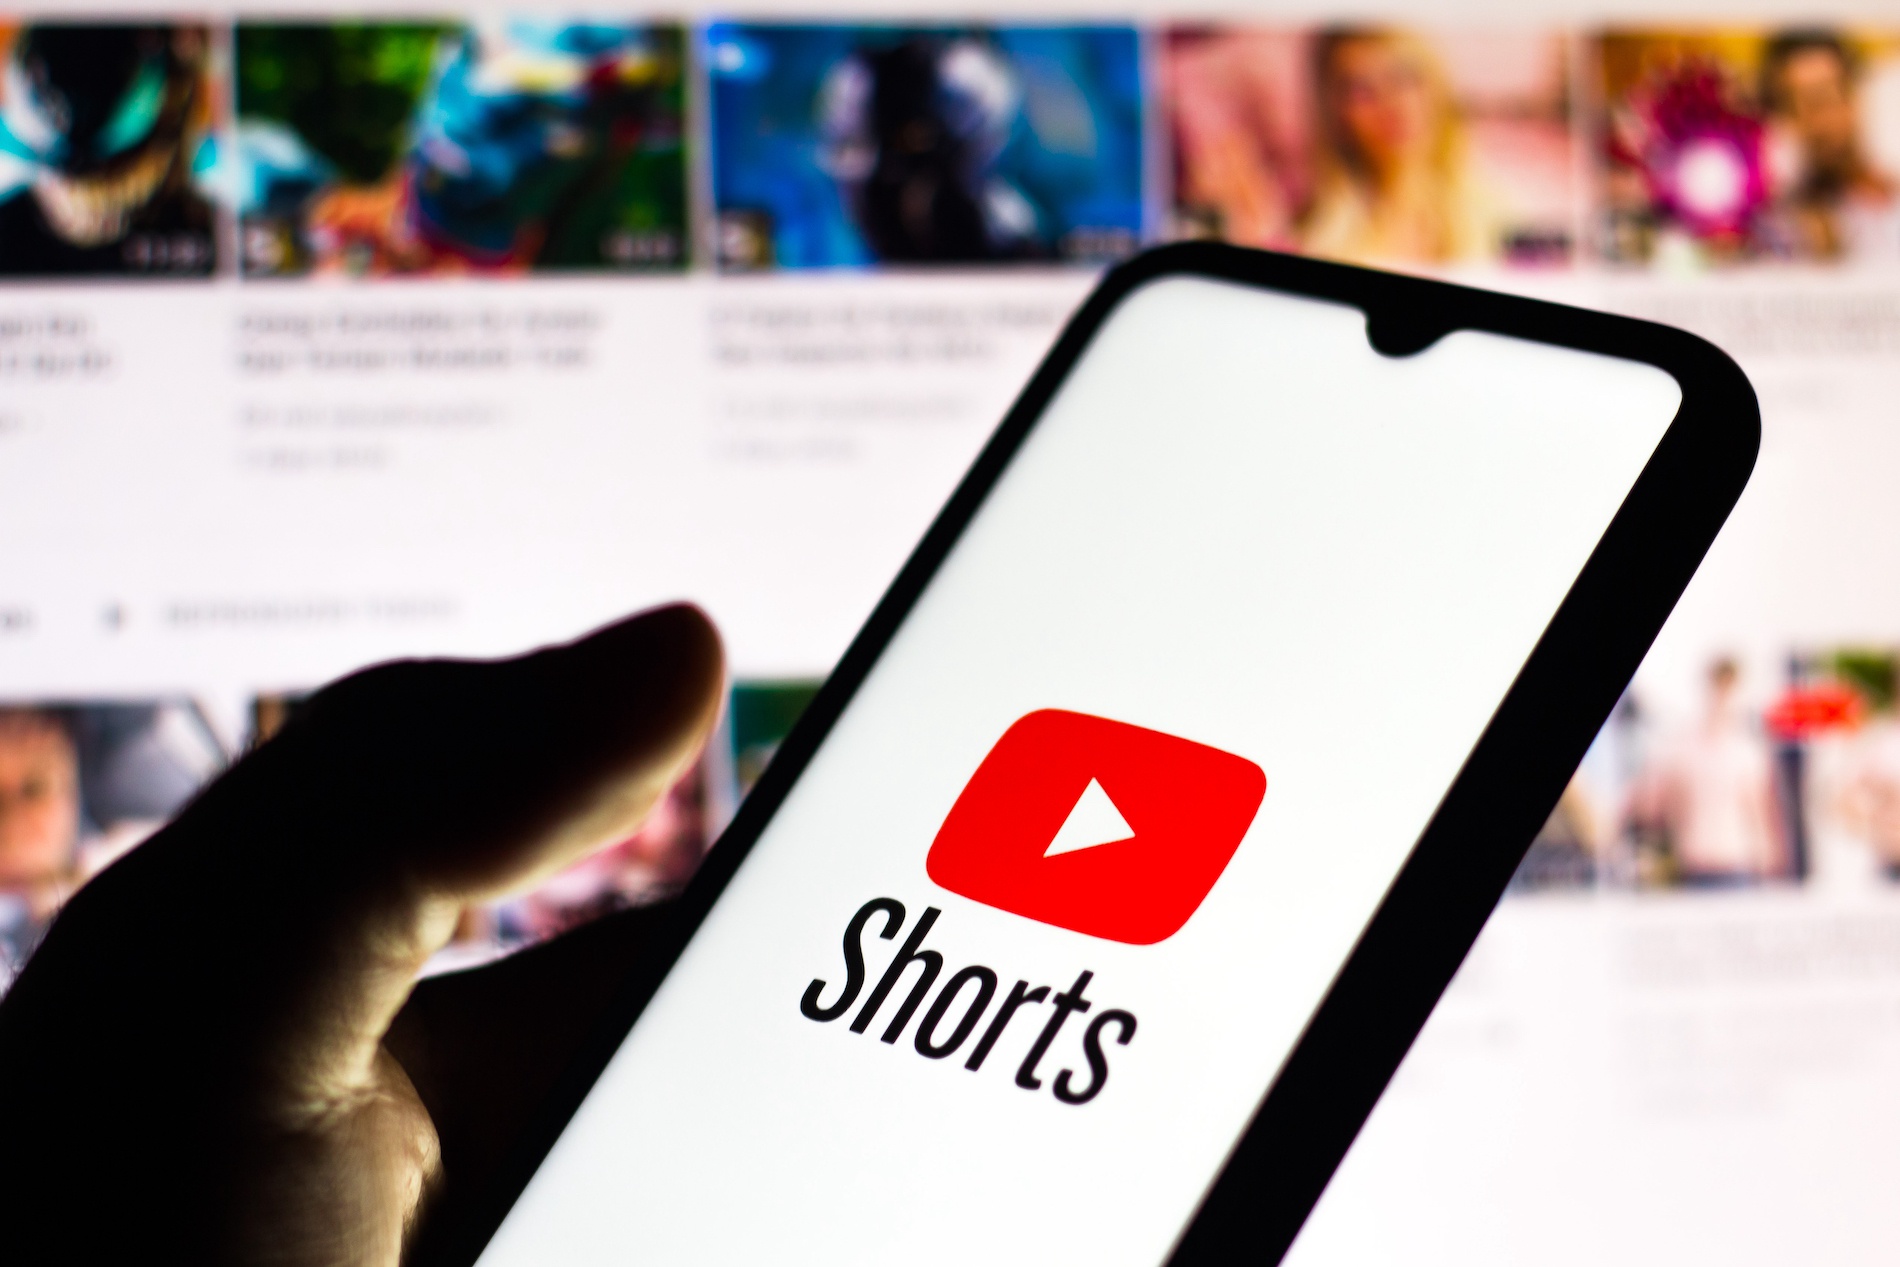 Google Launches  Shorts to Compete with TikTok - NewsWatchTV